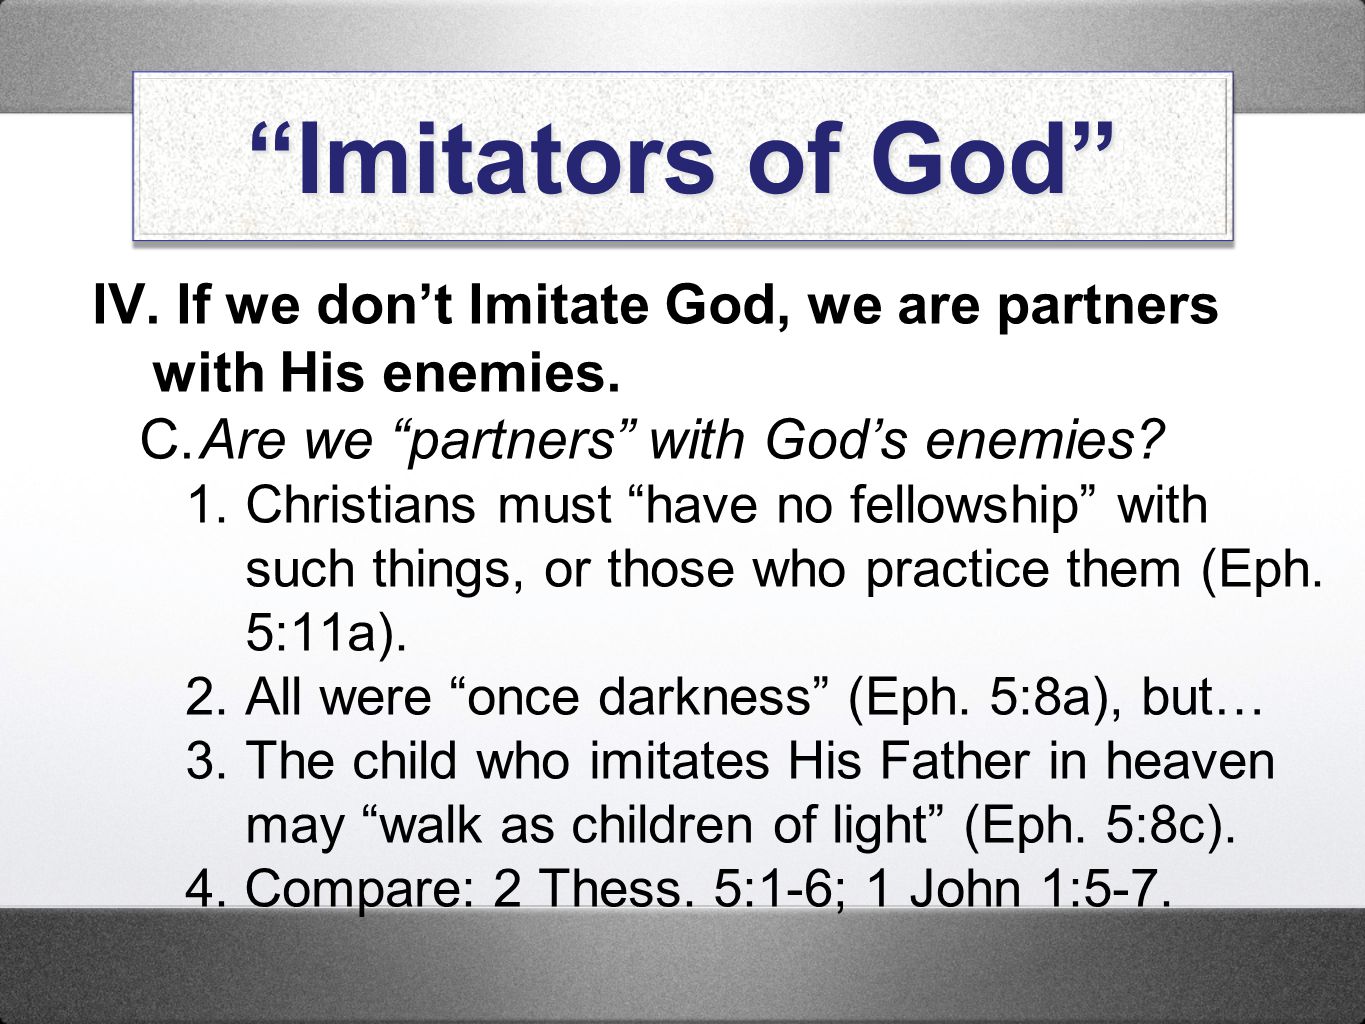 Imitators of God IV. If we don’t Imitate God, we are partners with His enemies. C. Are we partners with God’s enemies